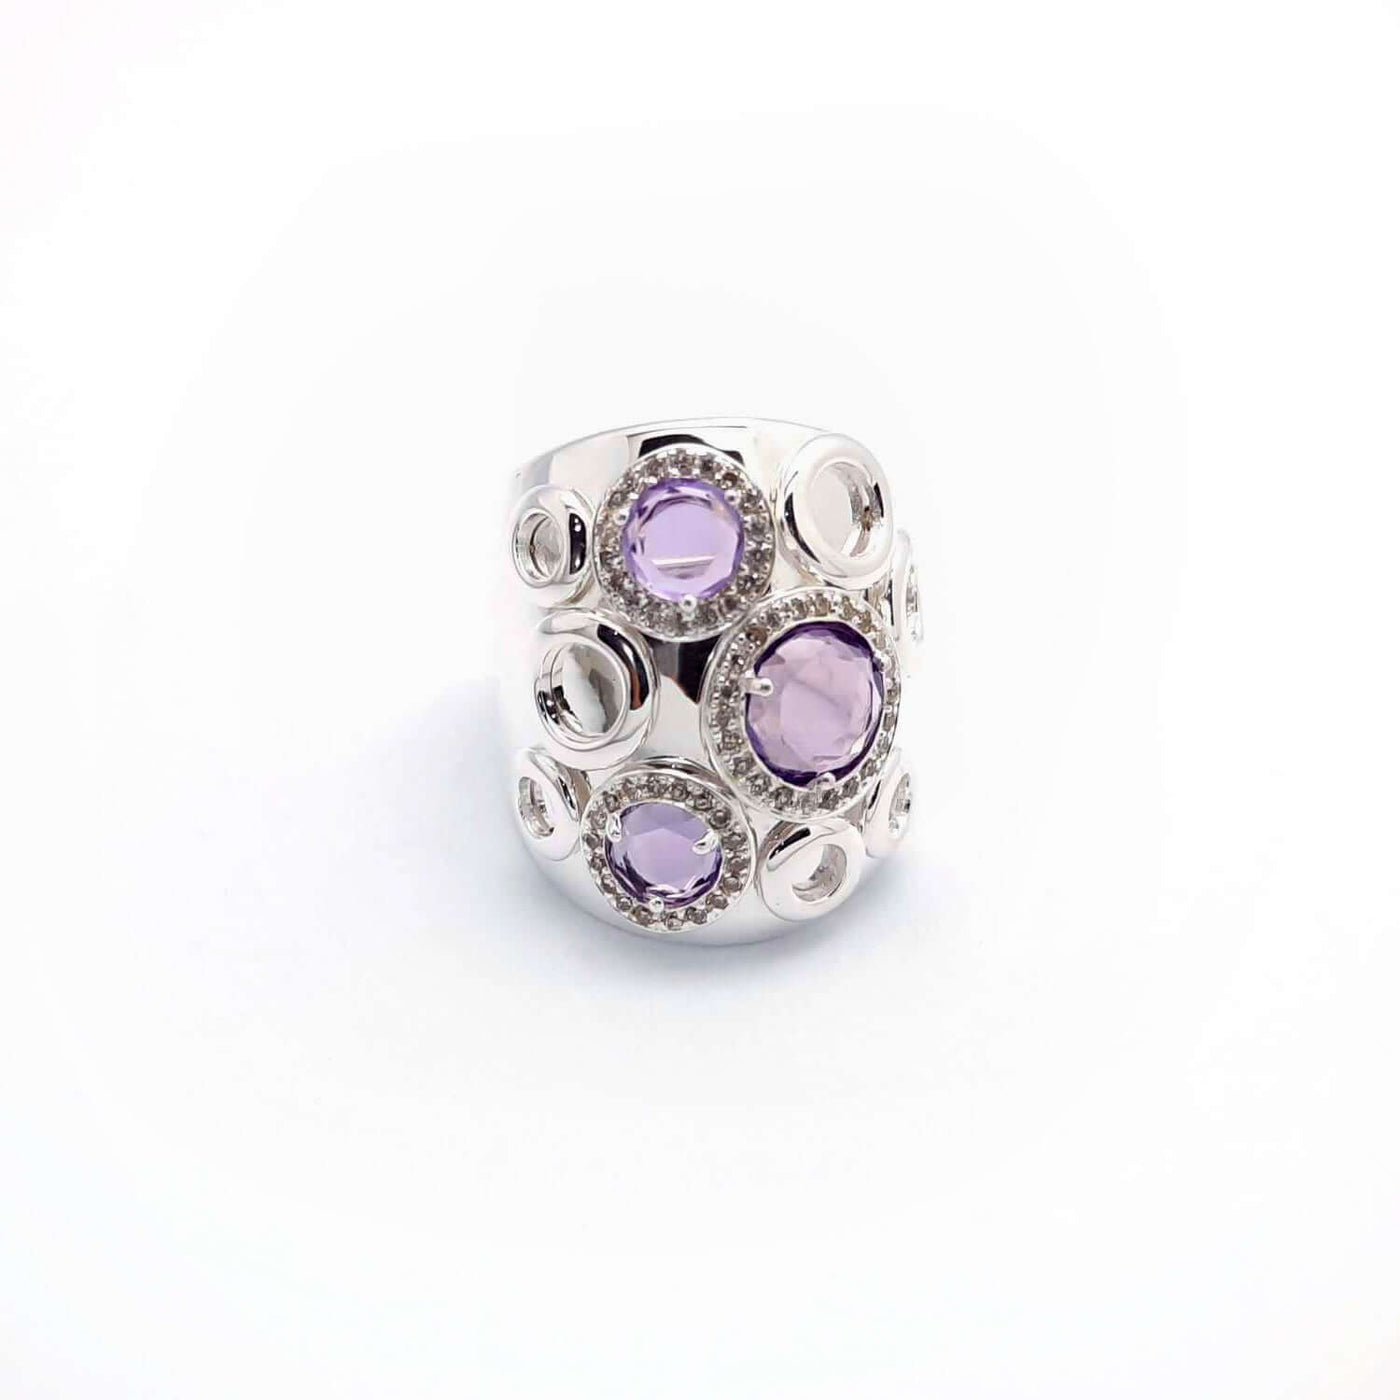 Pamplemousses - Silver Ring with Amethysts and Cubic Zirconias